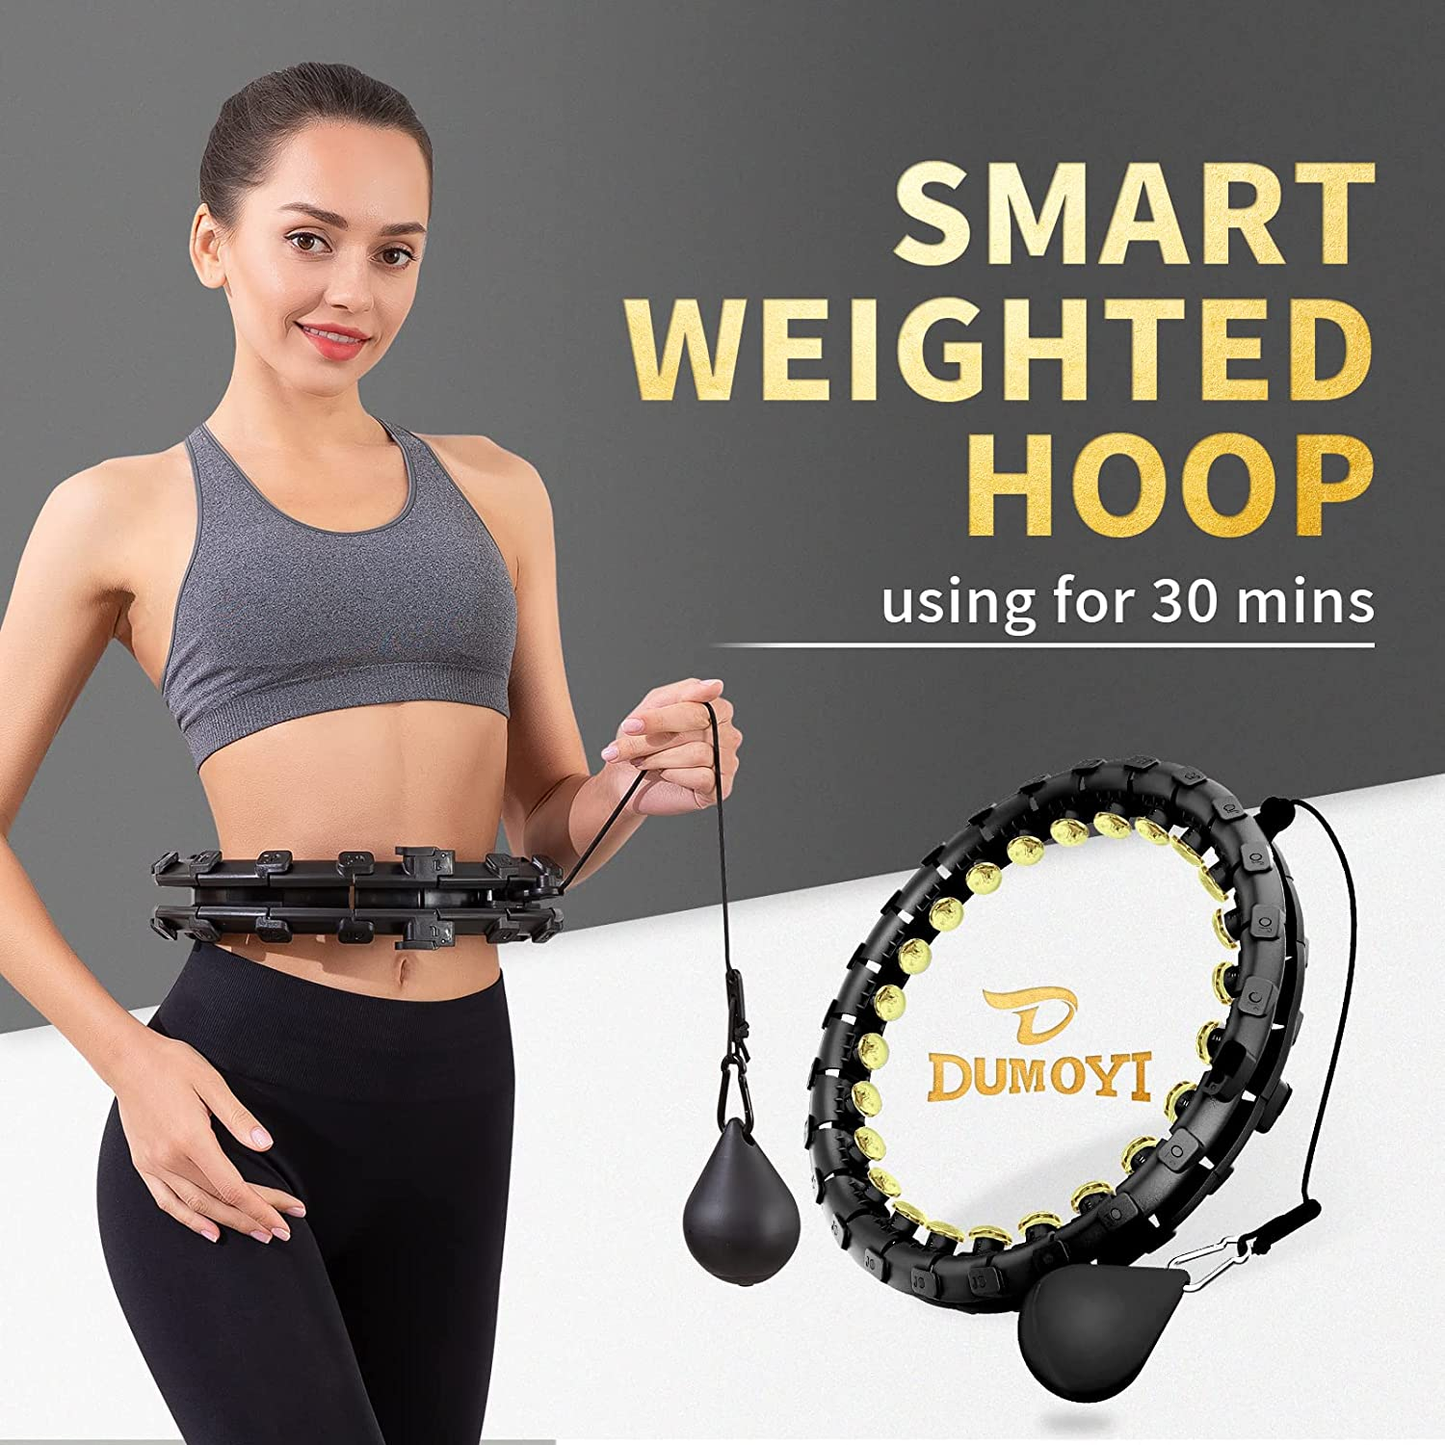 Dumoyi Smart Weighted Fit Hoop for Adults Weight Loss, 24 Detachable Knots, 2 in 1 Adomen Fitness Massage, Great for Adults and Beginners